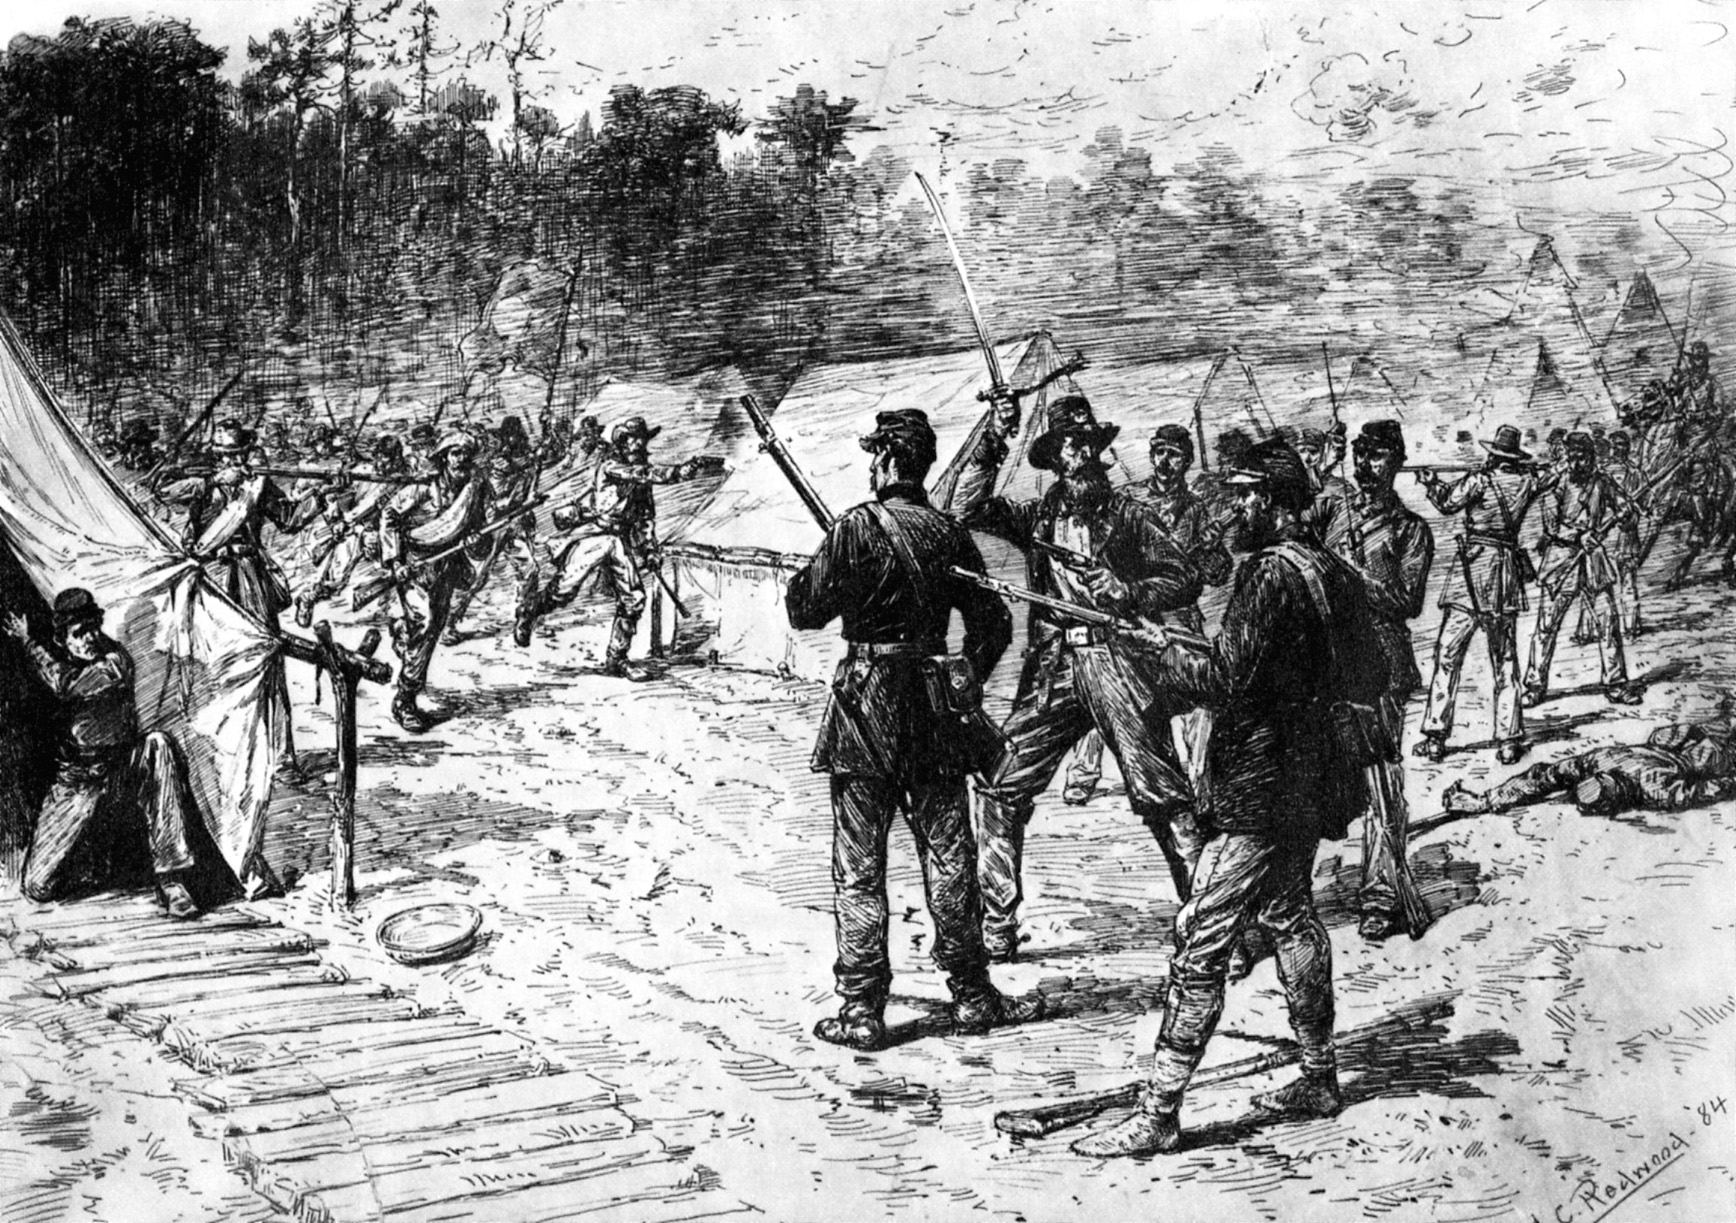 A hastily formed Federal battle line prepares to meet a mob of onrushing Confederates on the outskirts of the Federal camp during the first minutes of the battle on April 6, 1862. 